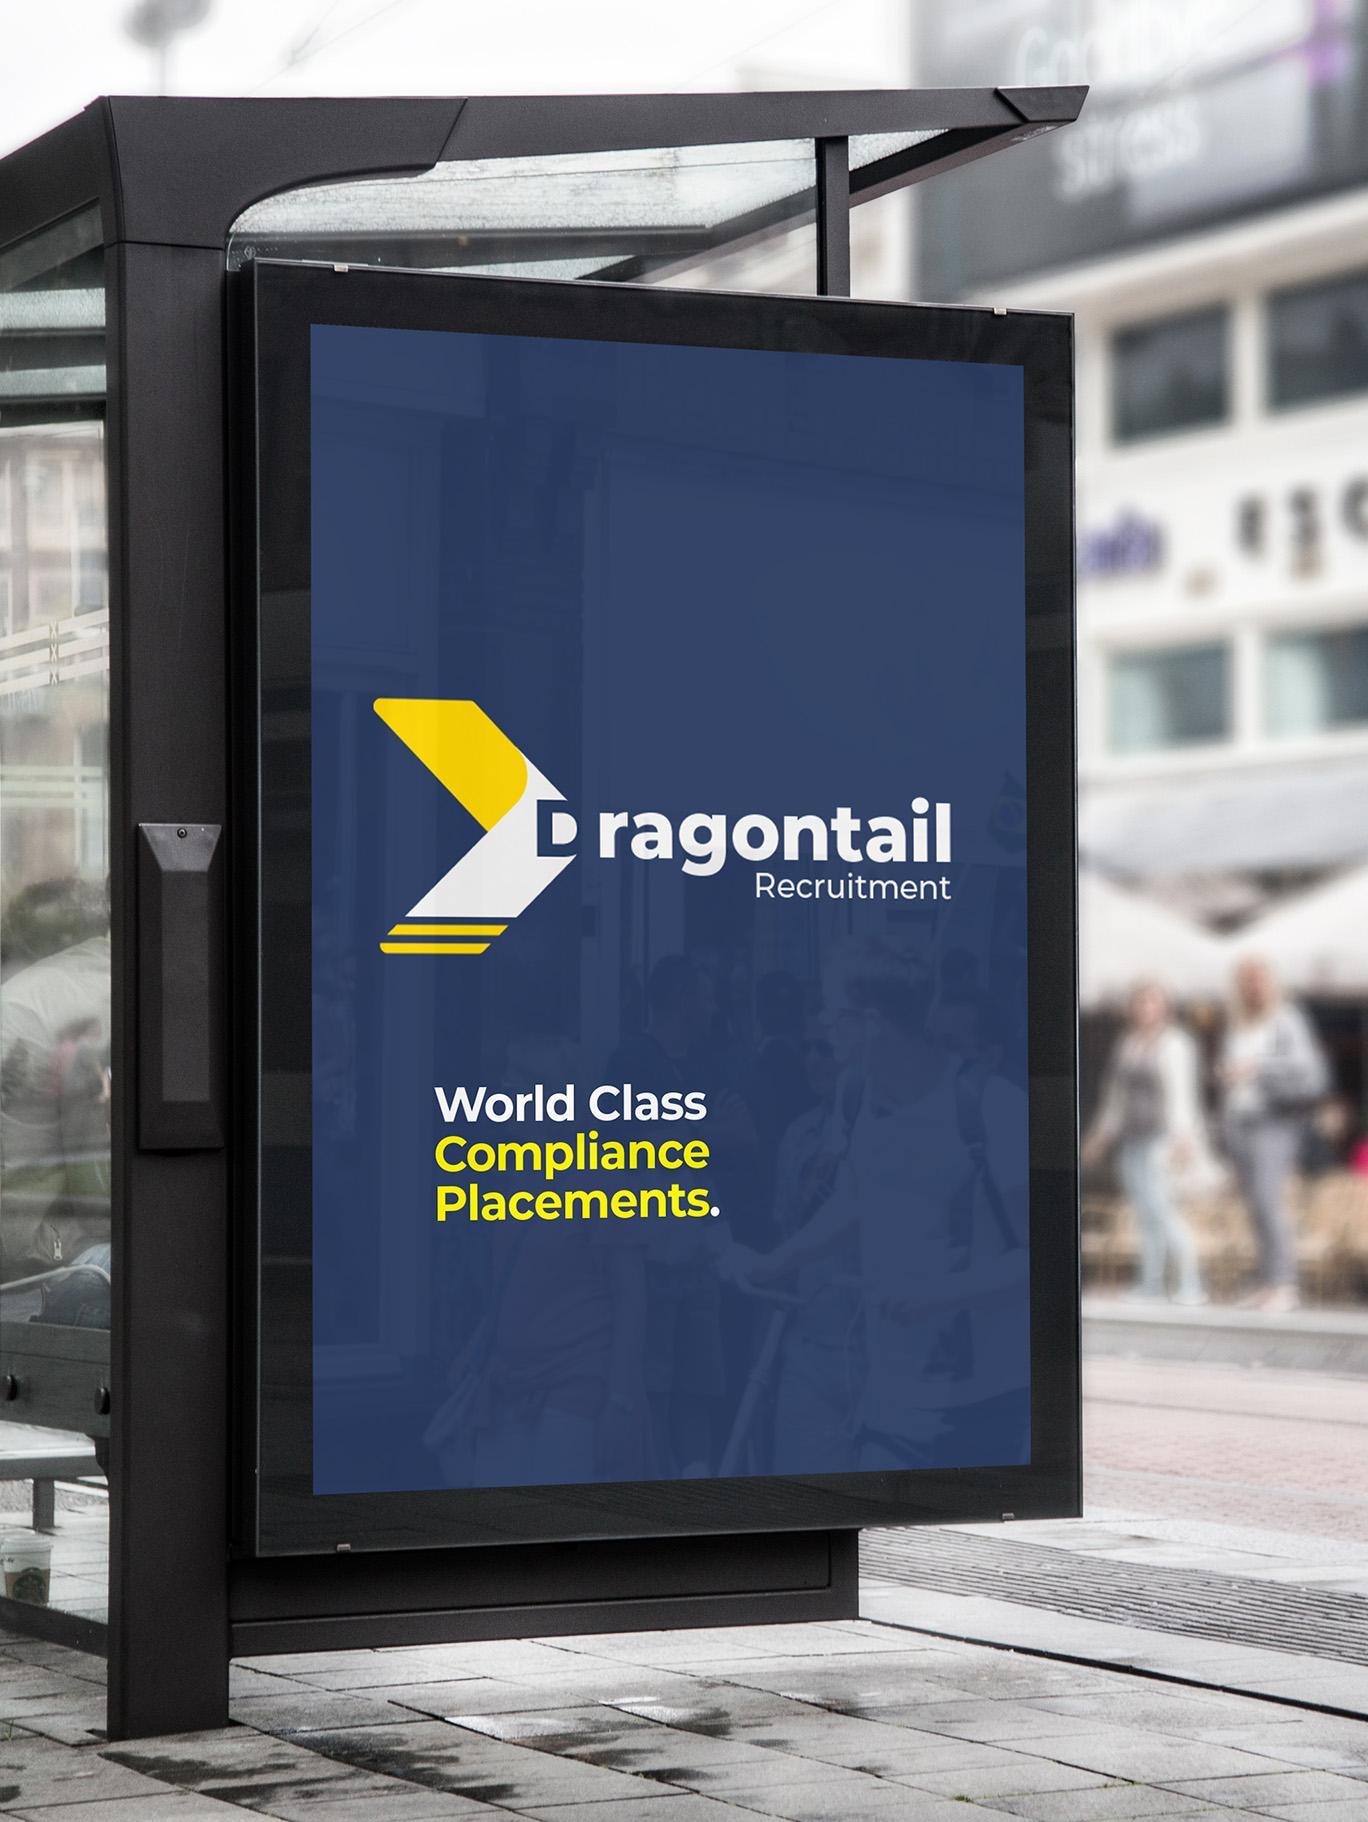 Why Dragontail Recruitment?